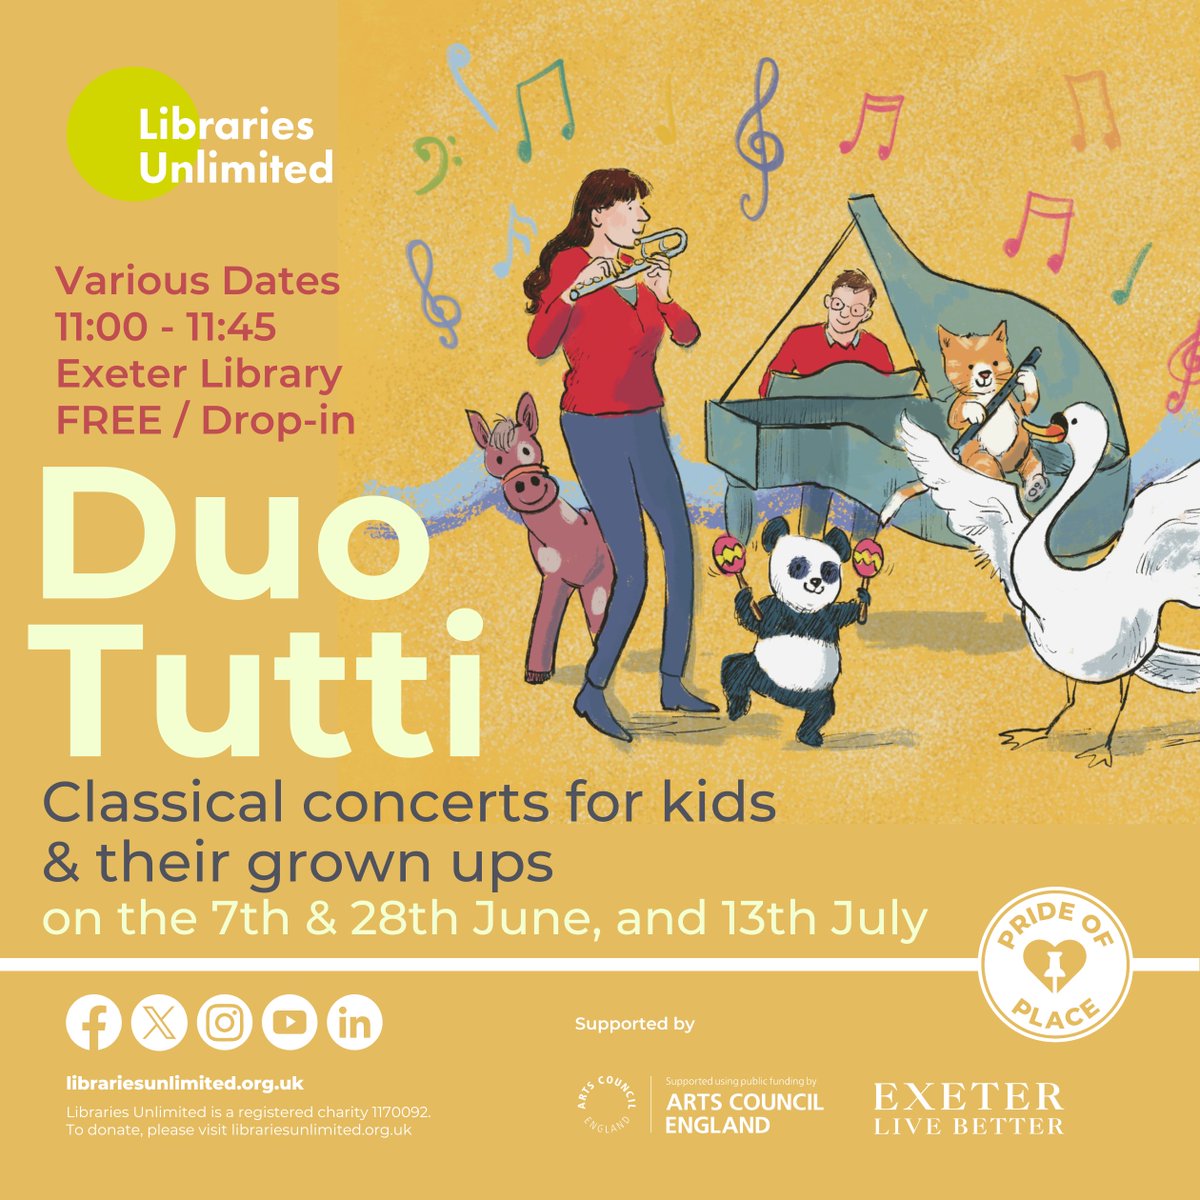 🎶Enjoy a themed classical concert for kids with Duo Tutti at the Children’s Library! This free 45min drop-in is perfect for preschoolers, but kids of any age are welcome!🎵👩‍👧‍👦 Three dates: 🐾Animal Kingdom - June 7 🌟 Dances & Dreams - June 28 🌍 Around the World - July 13